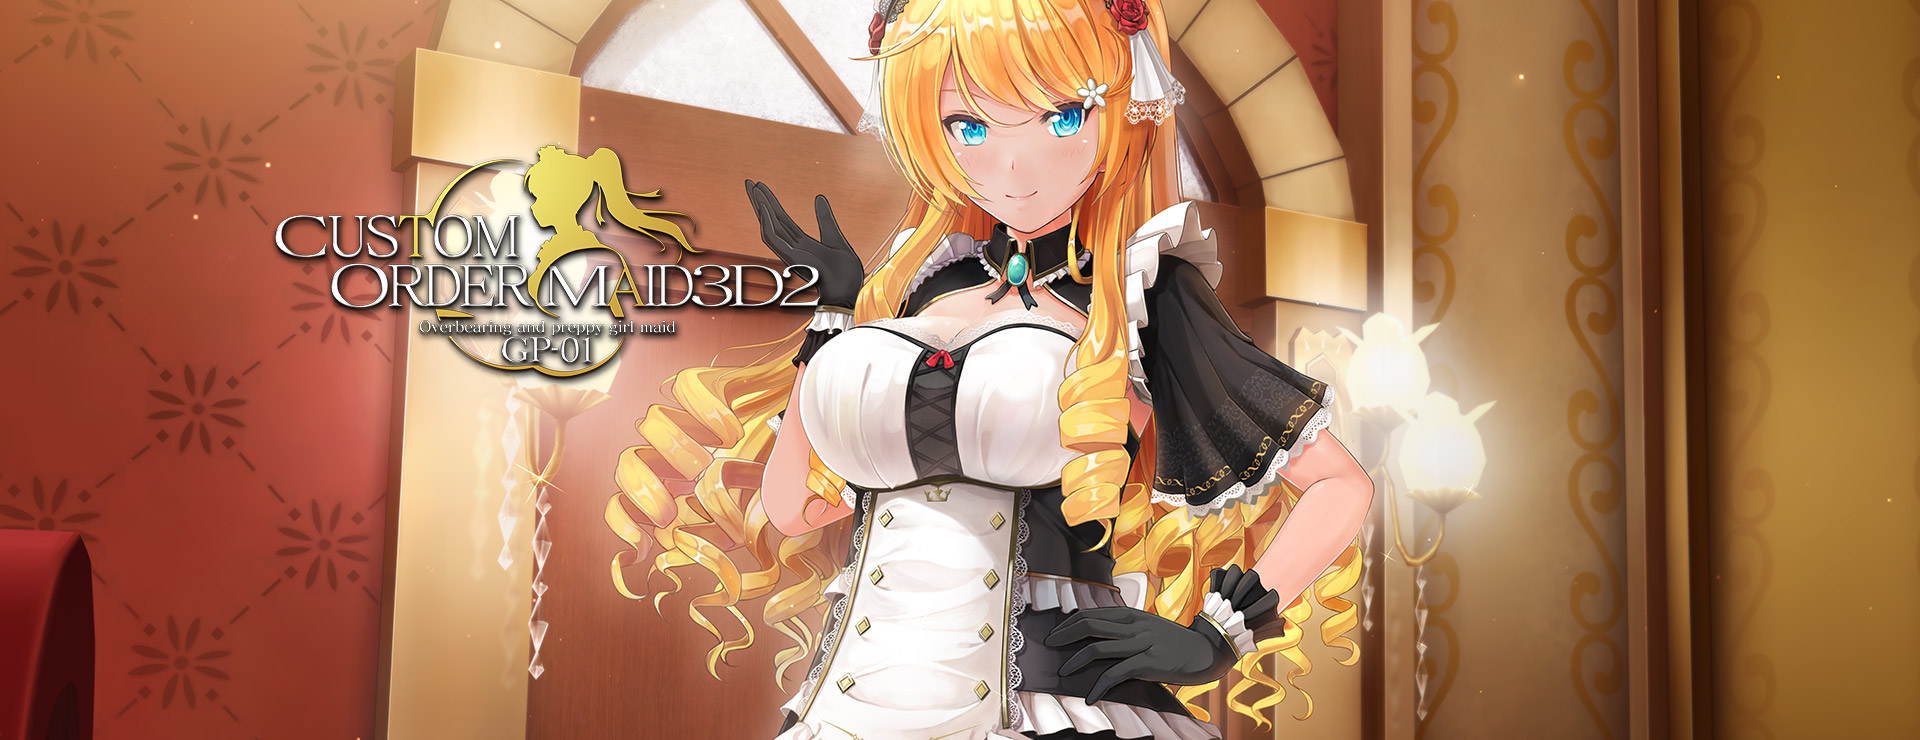 Custom Order Maid 3D2: Overbearing and Preppy Girl Maid GP-01 - Simulation Spiel